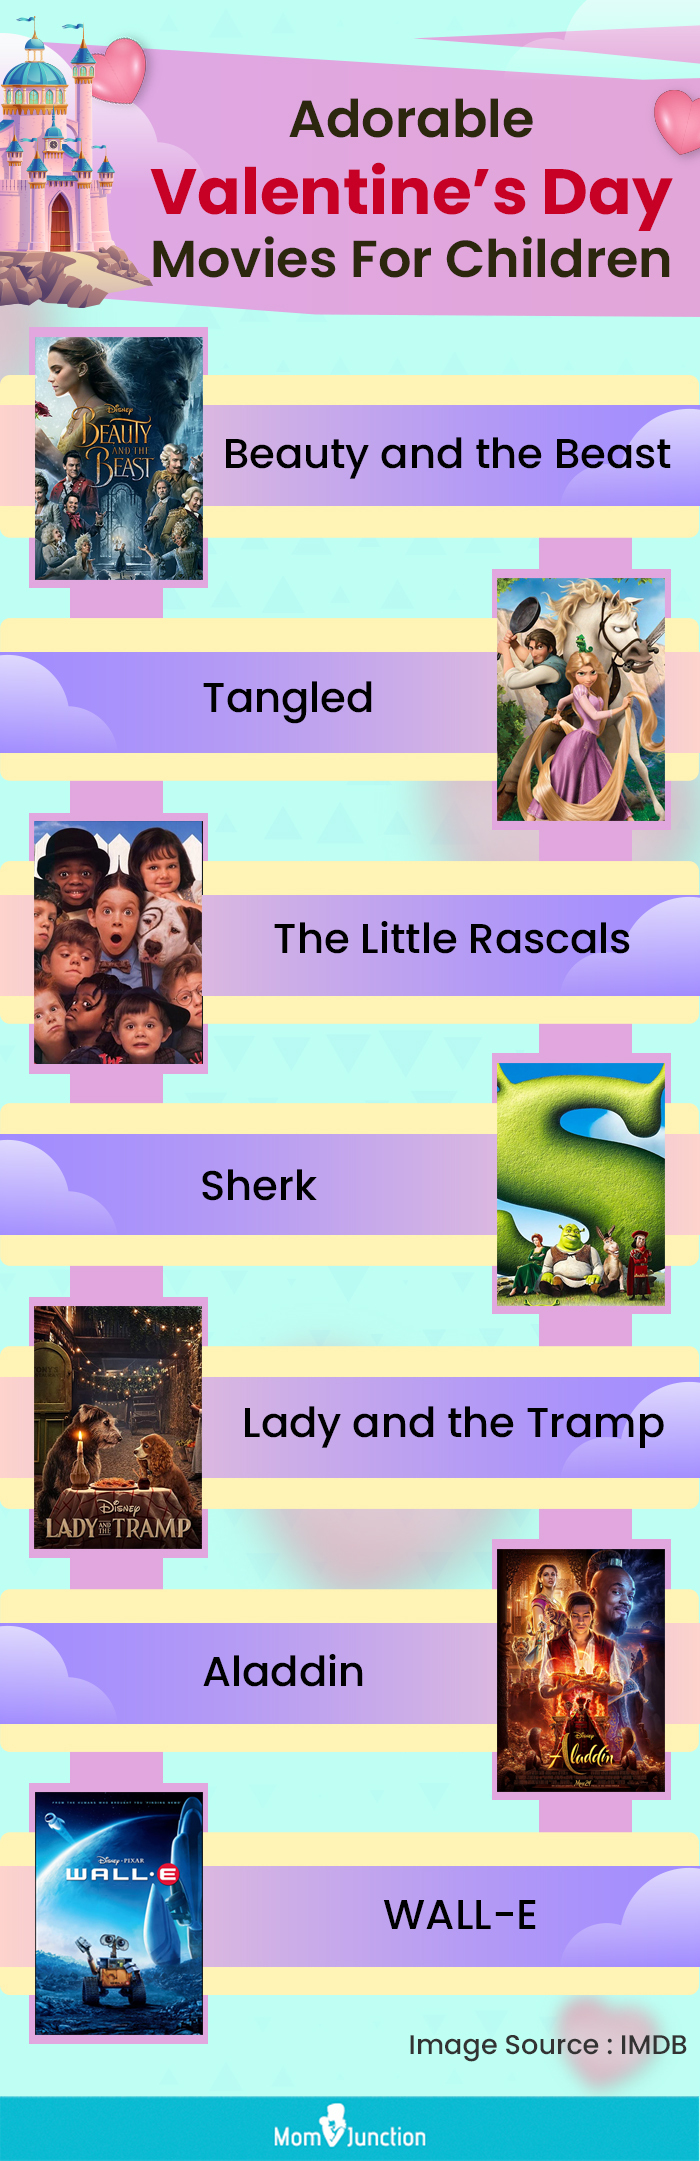 adorable valentines day movies for children (infographic)